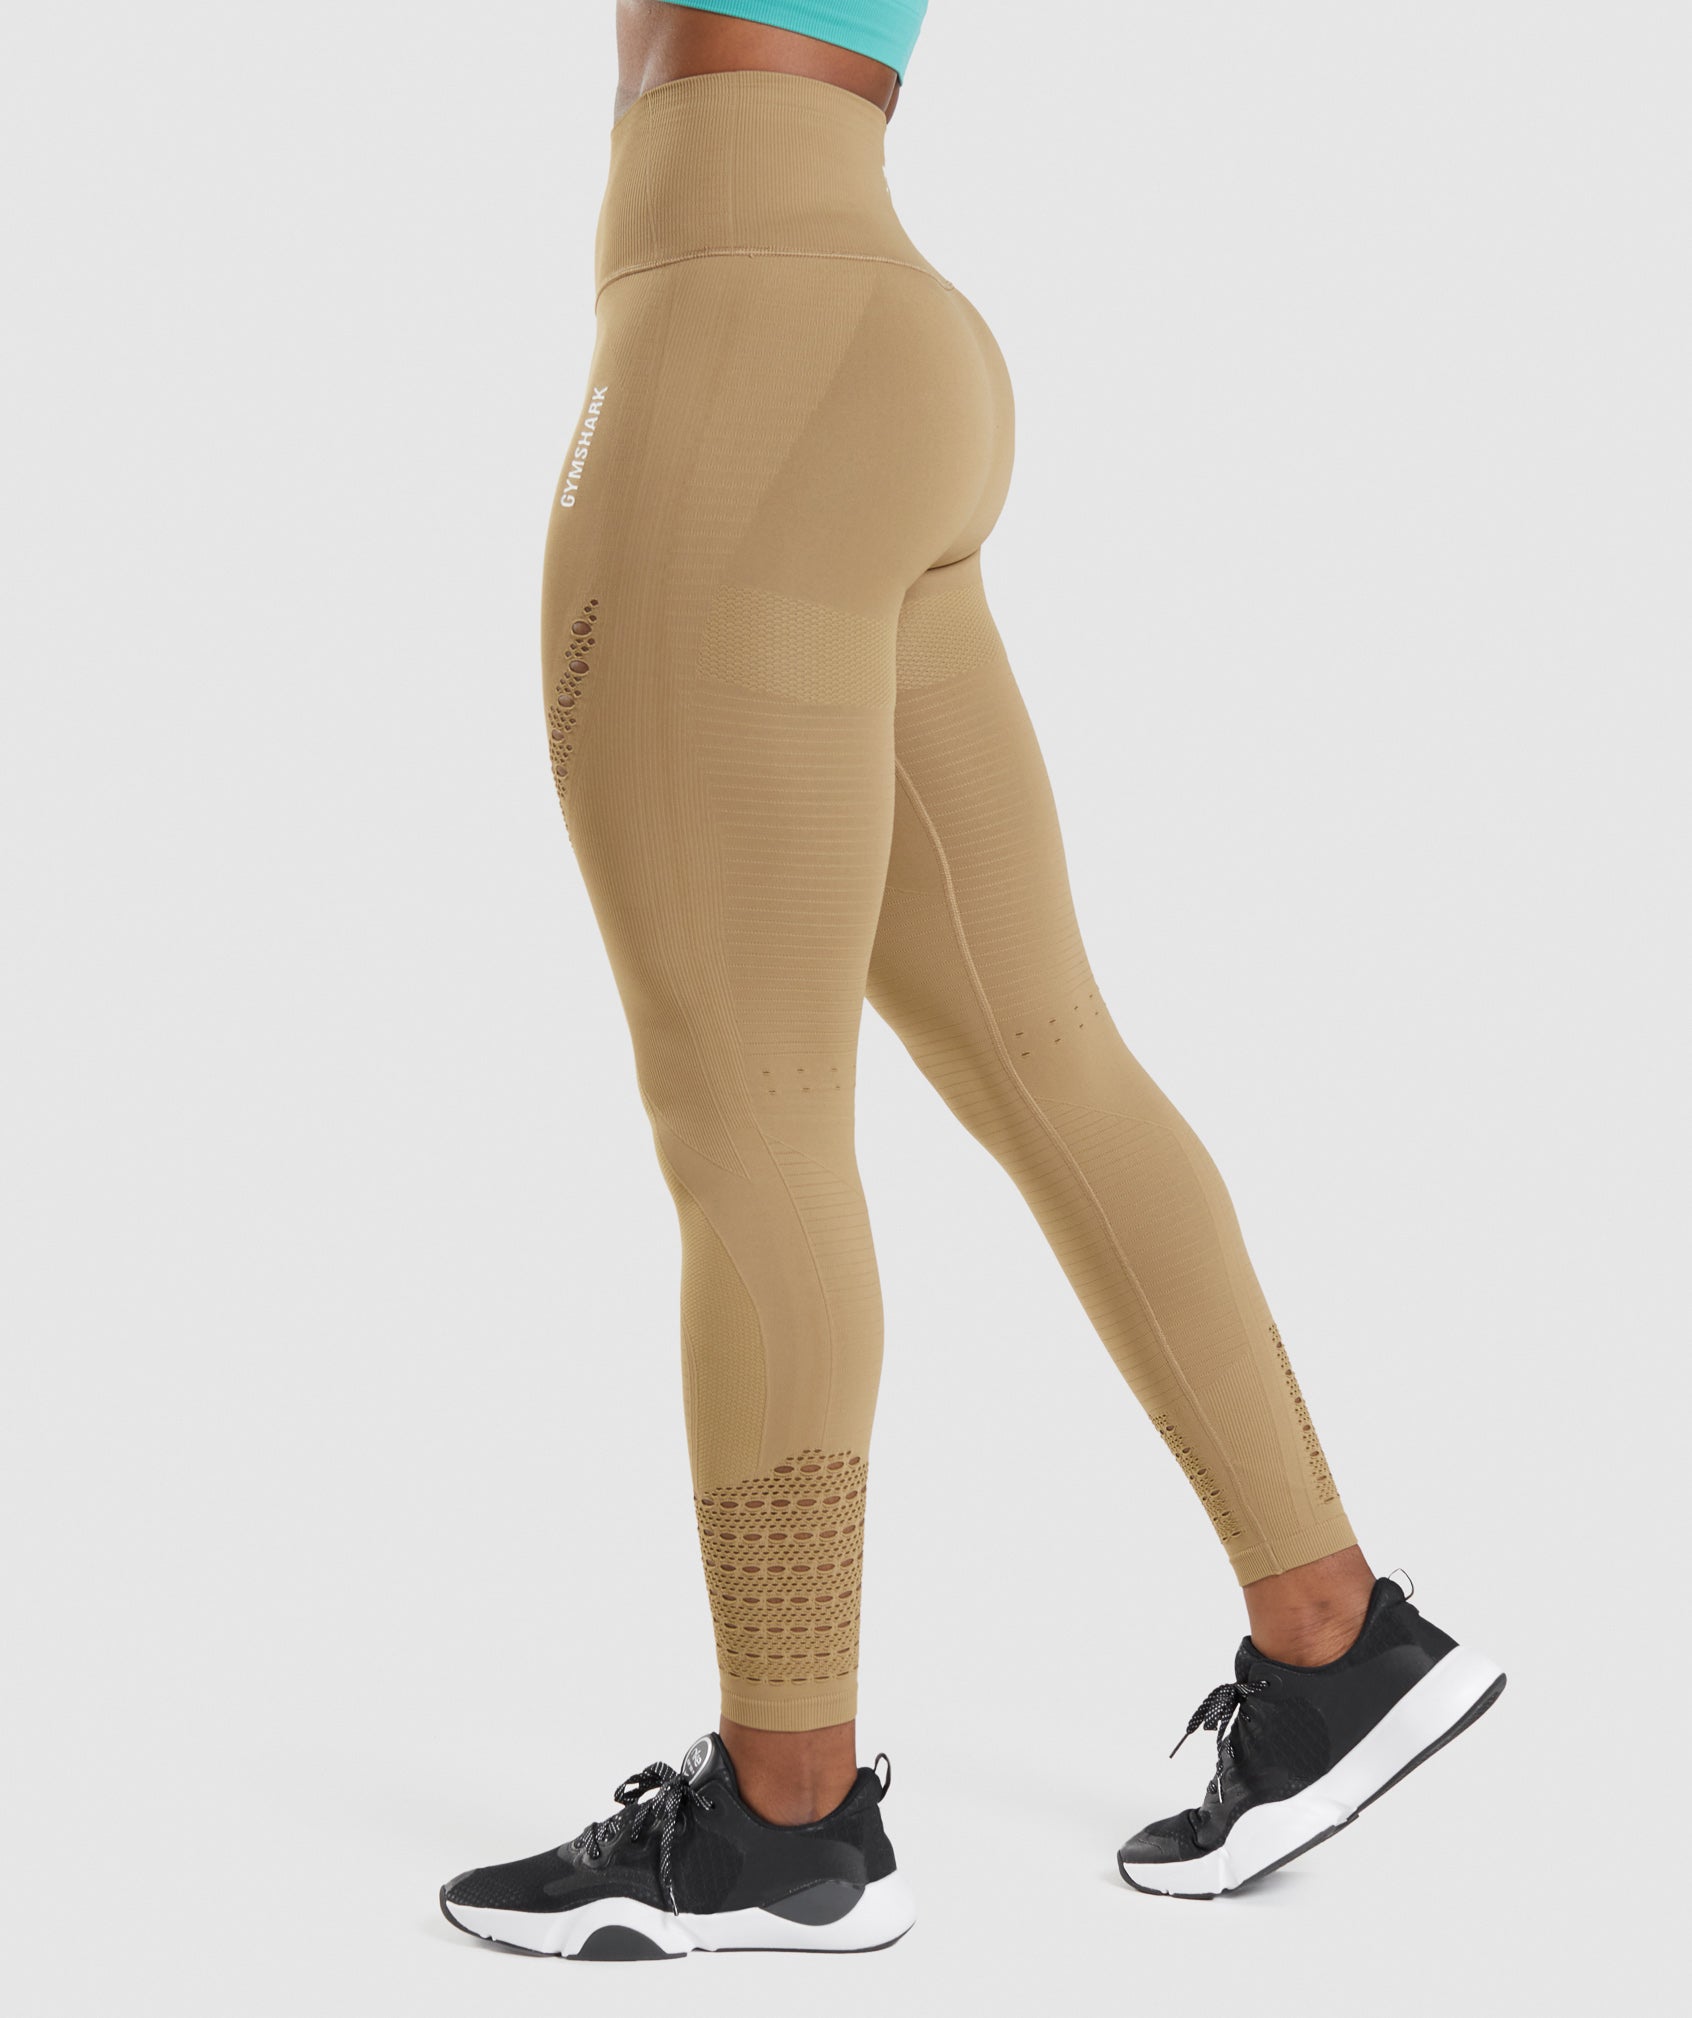 Energy Seamless Leggings in Biscotti Brown - view 3